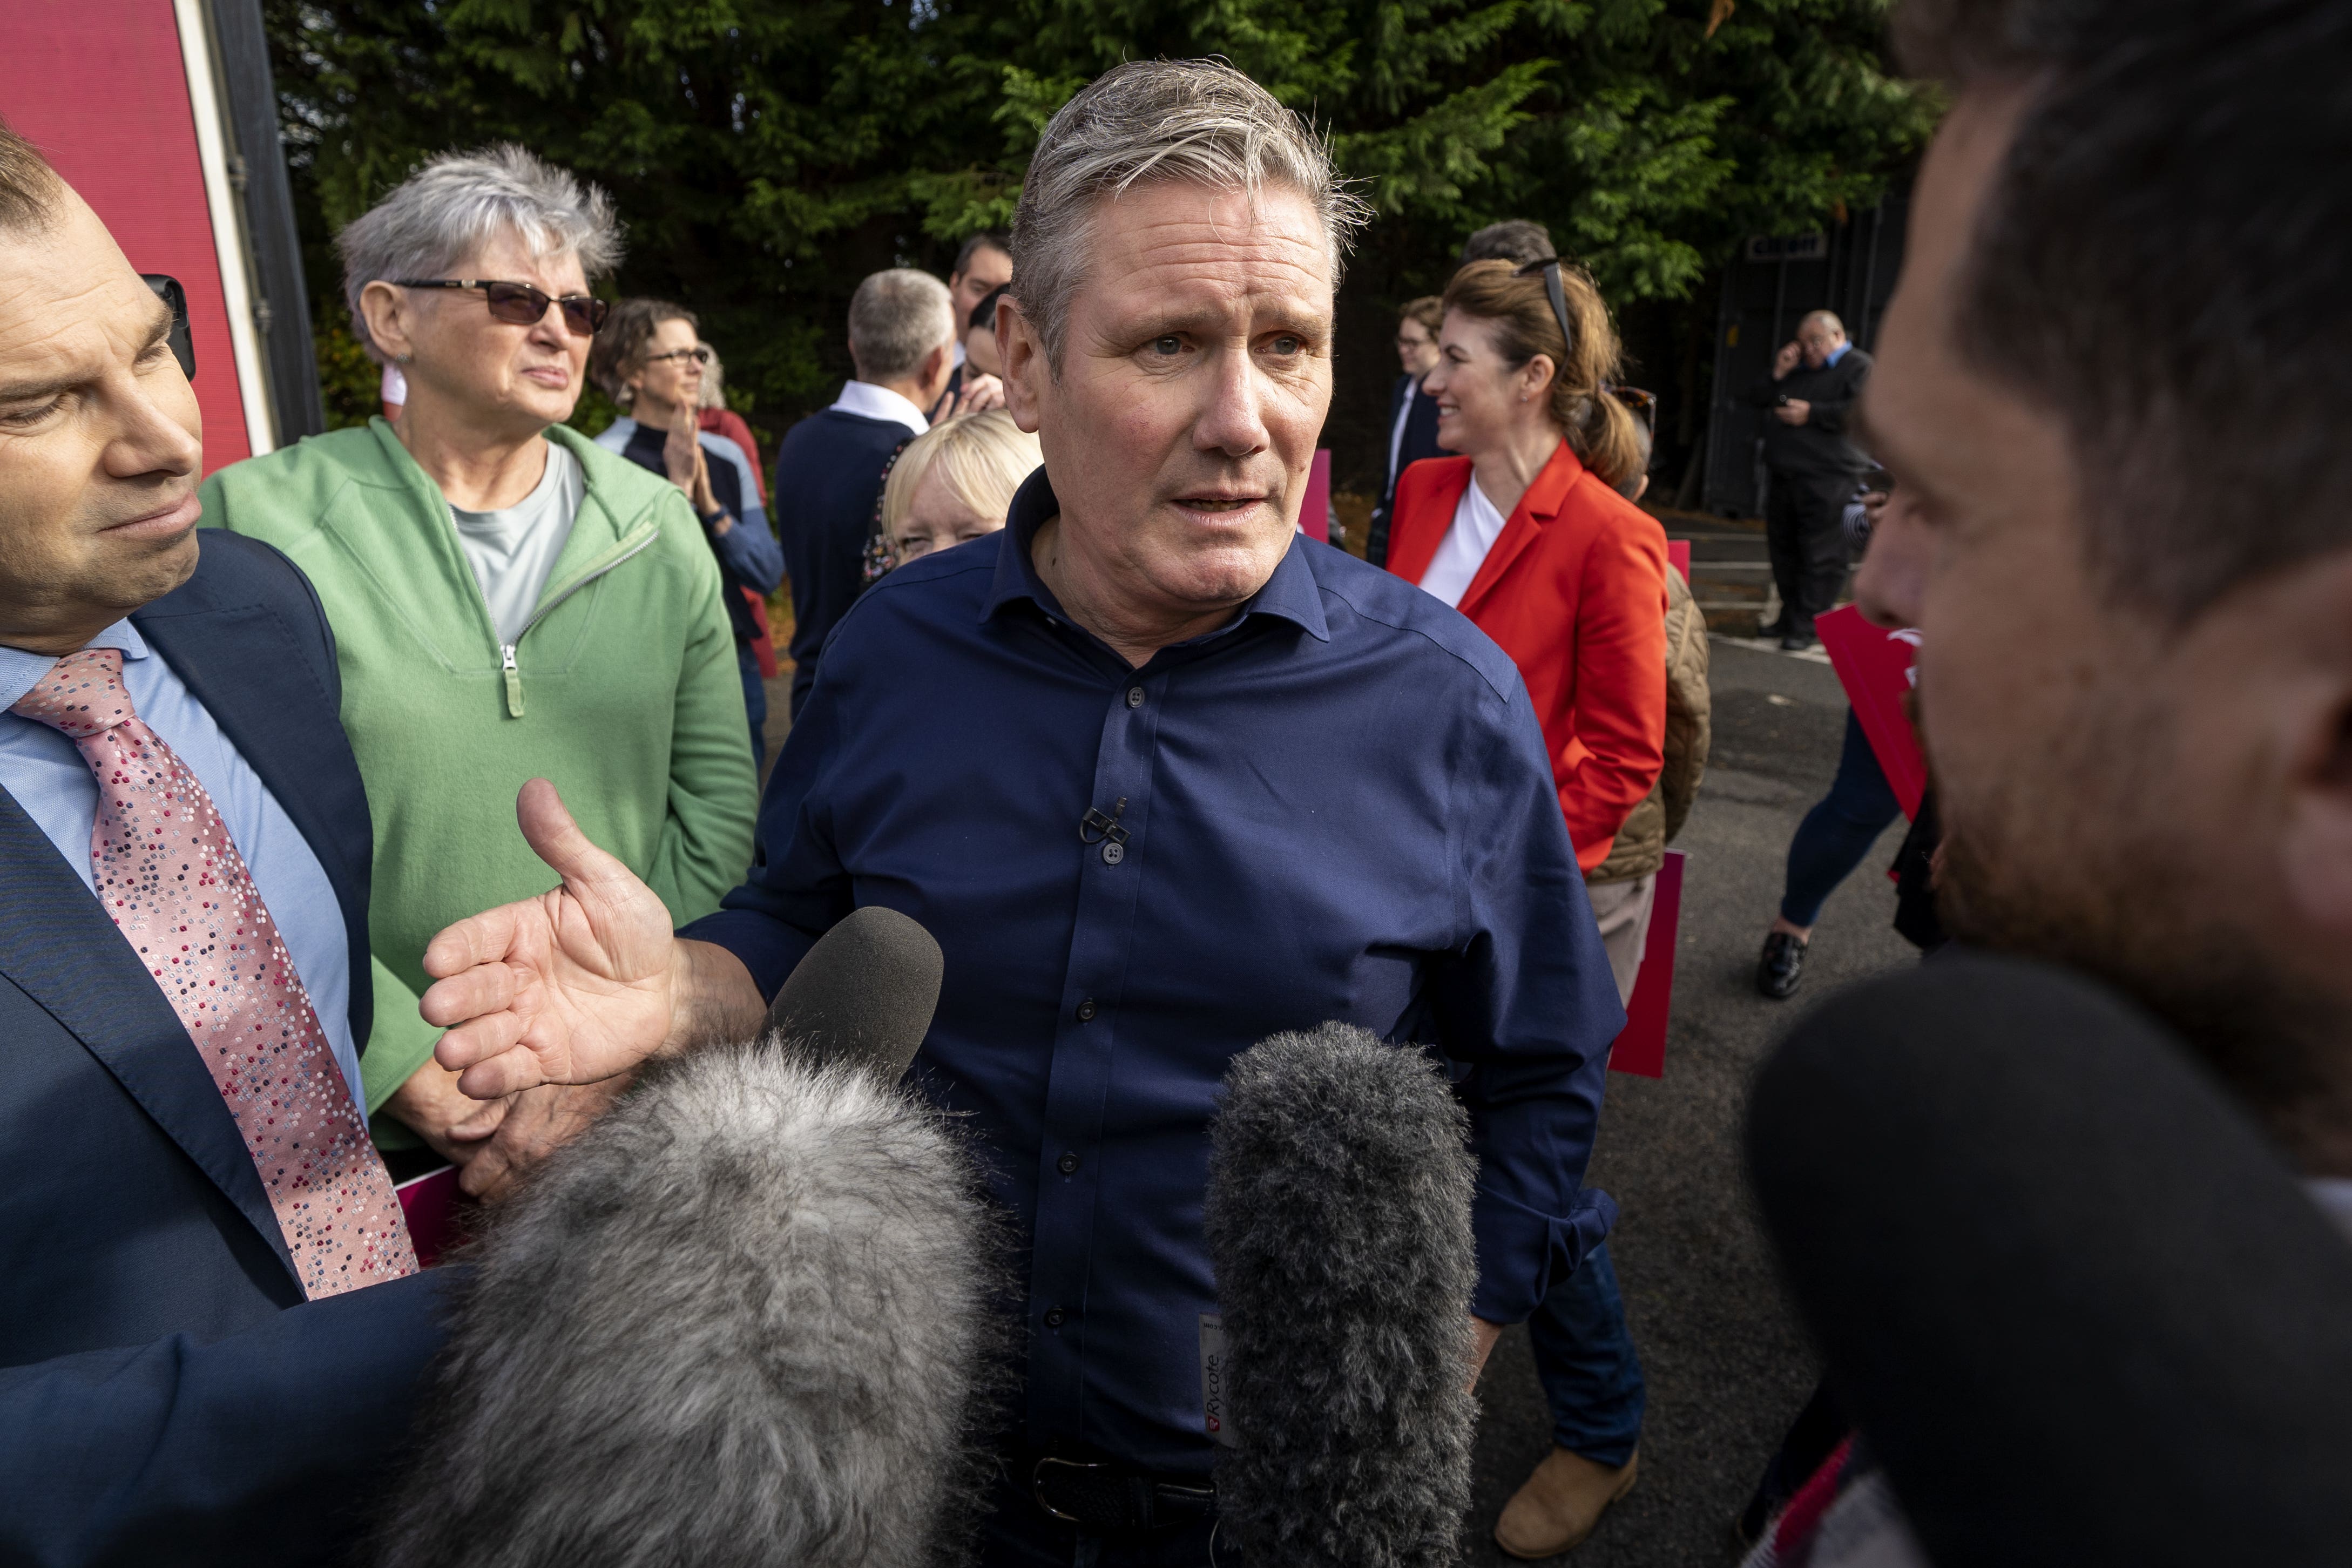 Despite his party’s poll lead, Starmer has been unsuccessful at impressing himself on voters